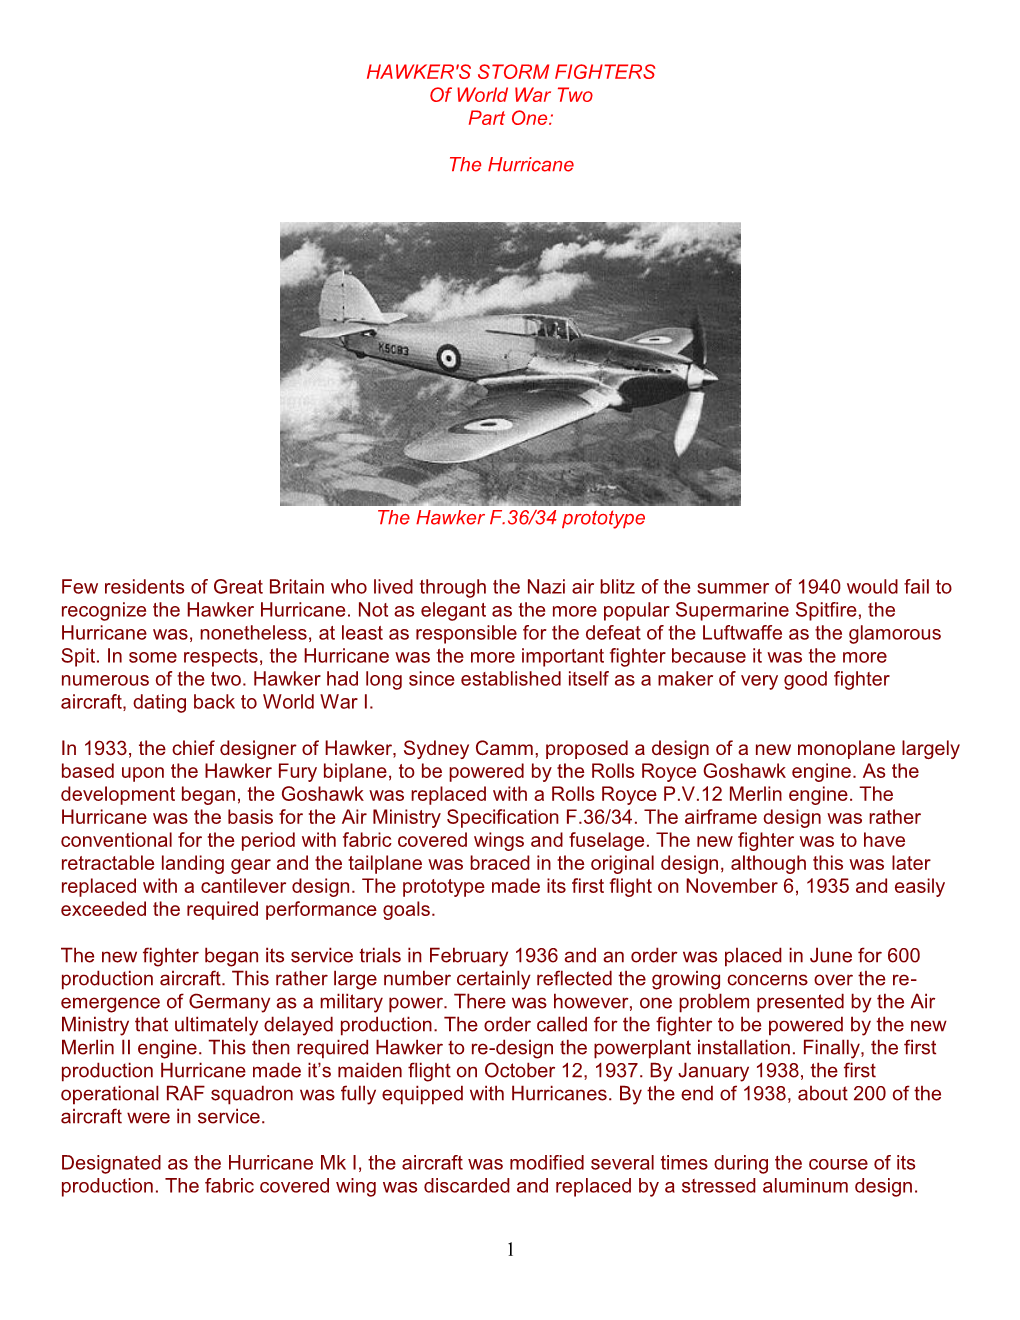 HAWKER's STORM FIGHTERS of World War Two Part One